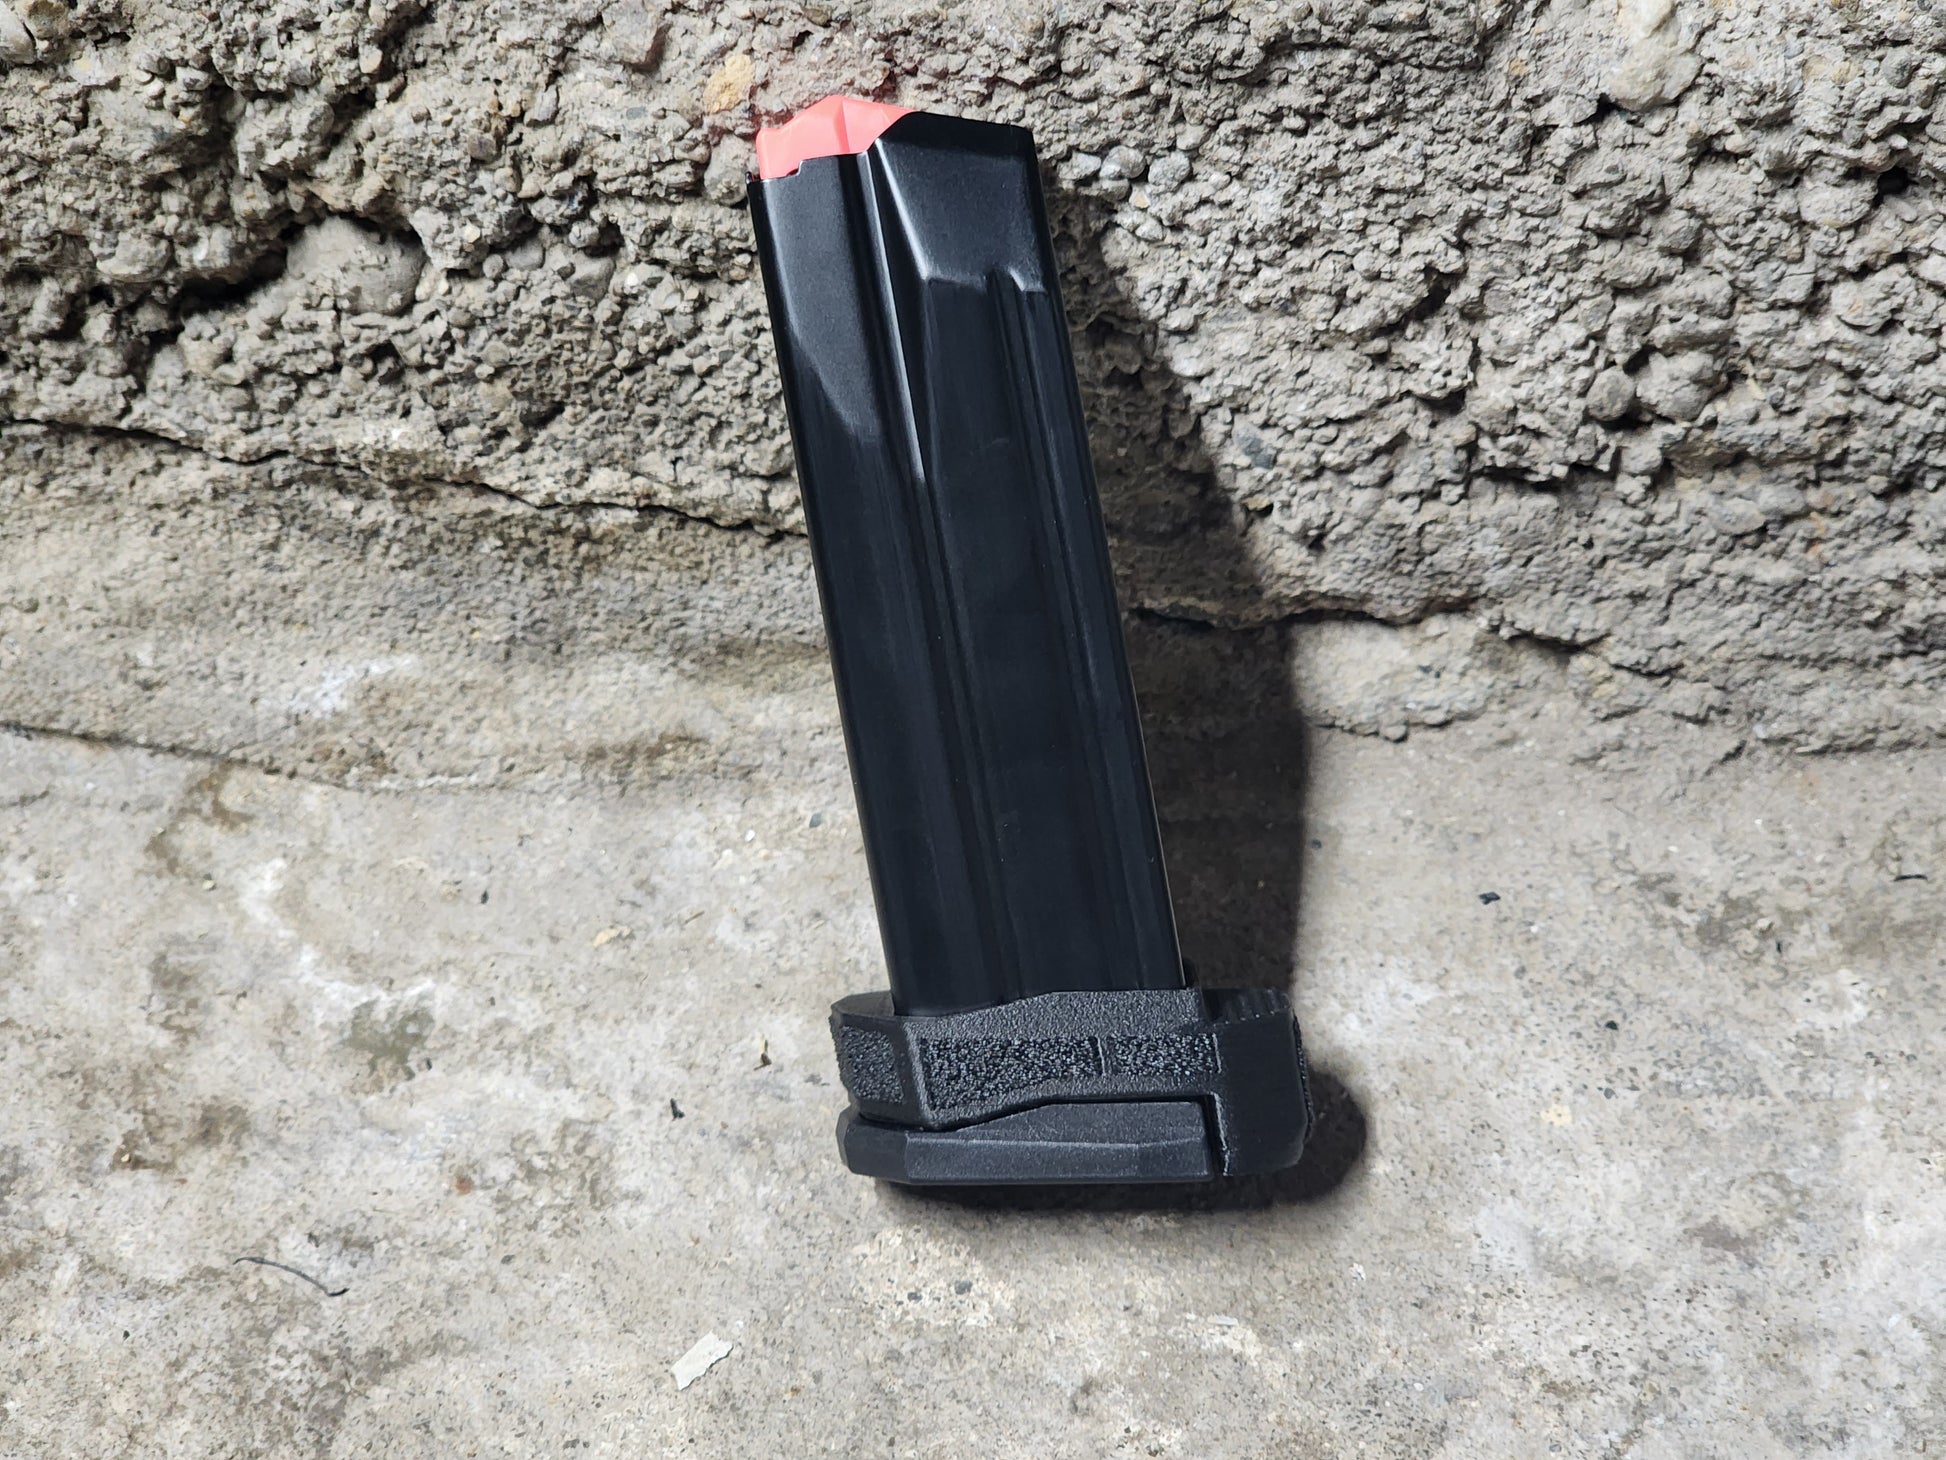 17 and 19 round capacity magazines aren't always a great option for carry, but they sure do make for fun at the range.  Use the NULL Adapter to run your big magazines in your AREX Delta M compact pistol to get more fun out of it. 